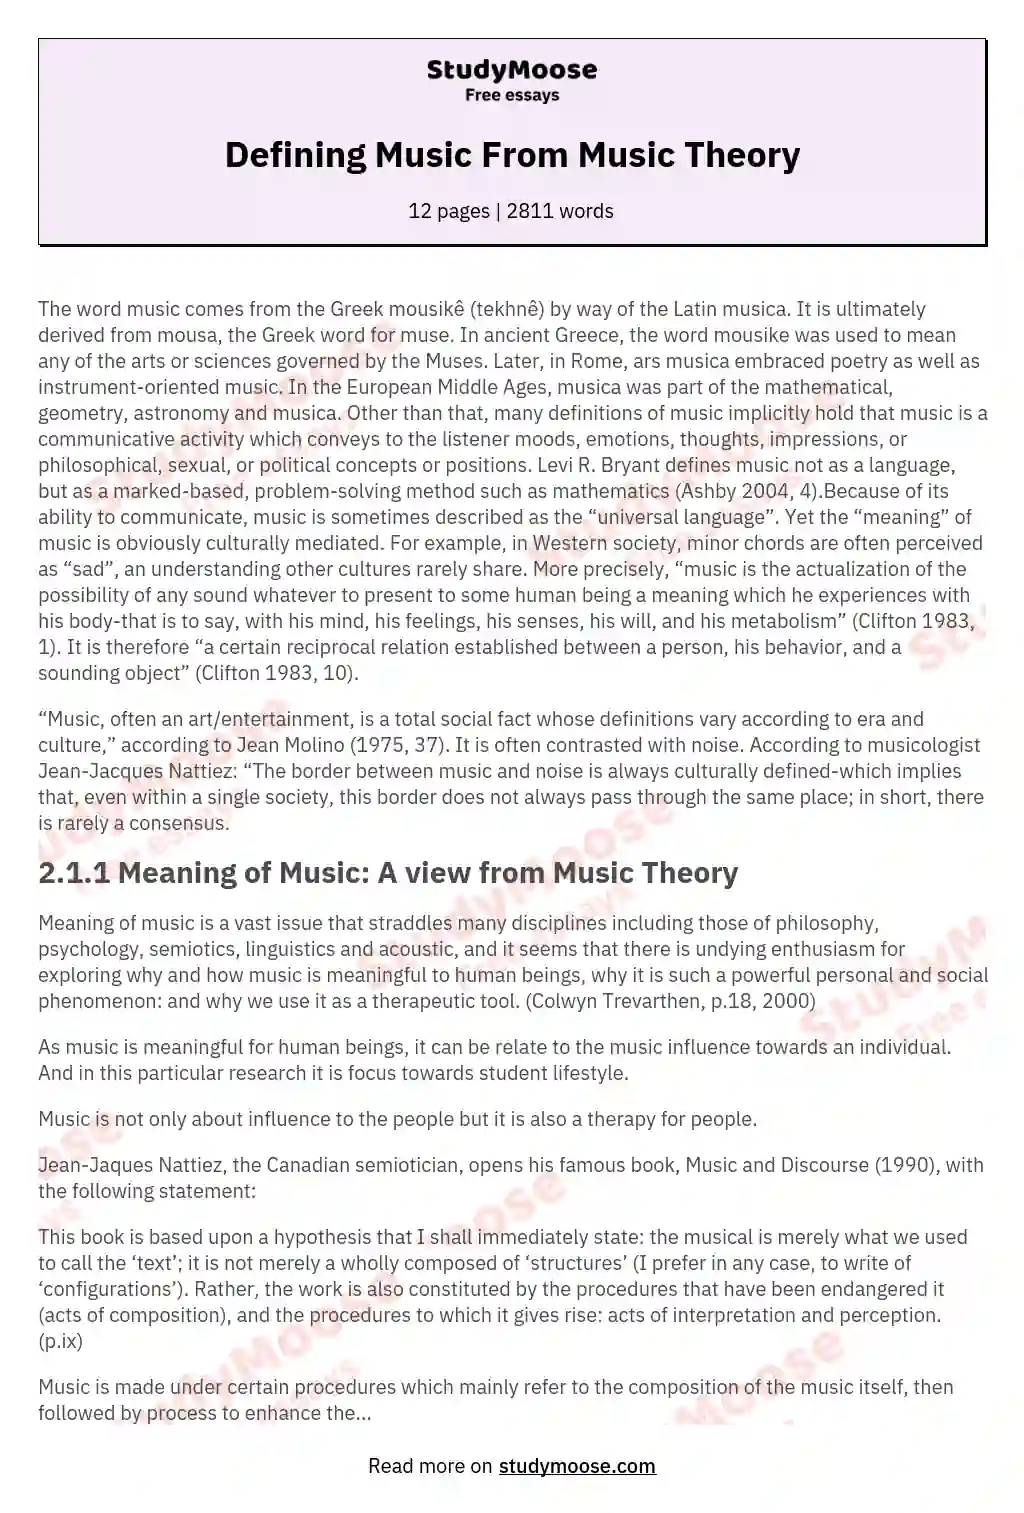 Defining Music From Music Theory